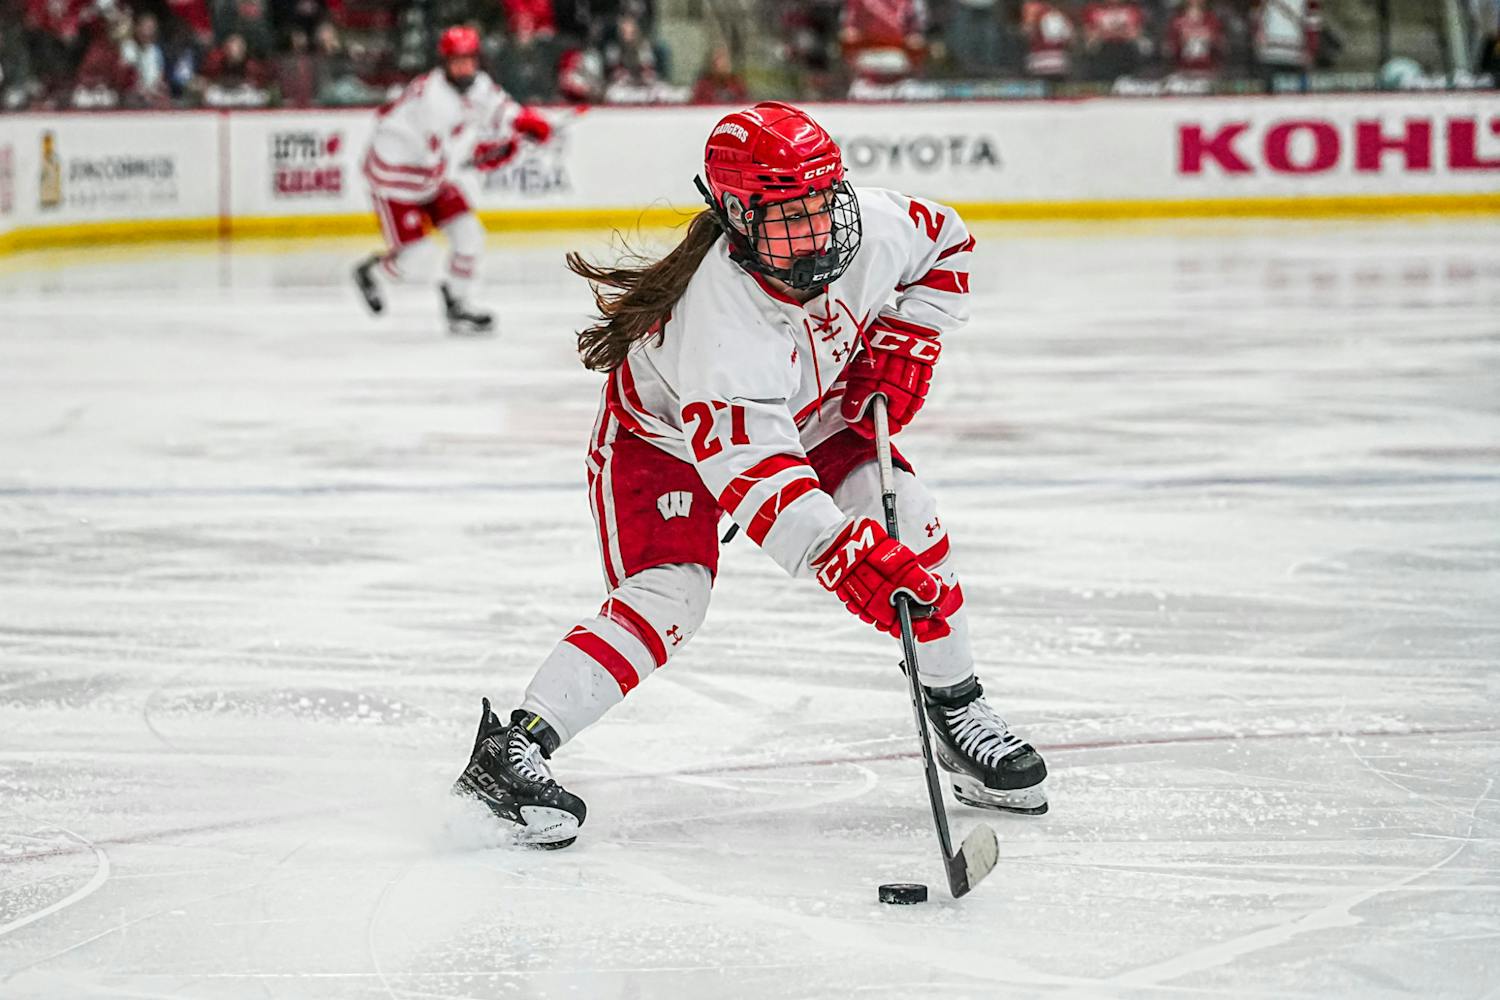 PHOTOS: After 16 straight wins, Ohio State women's ice hockey fell to the Wisconsin Badgers